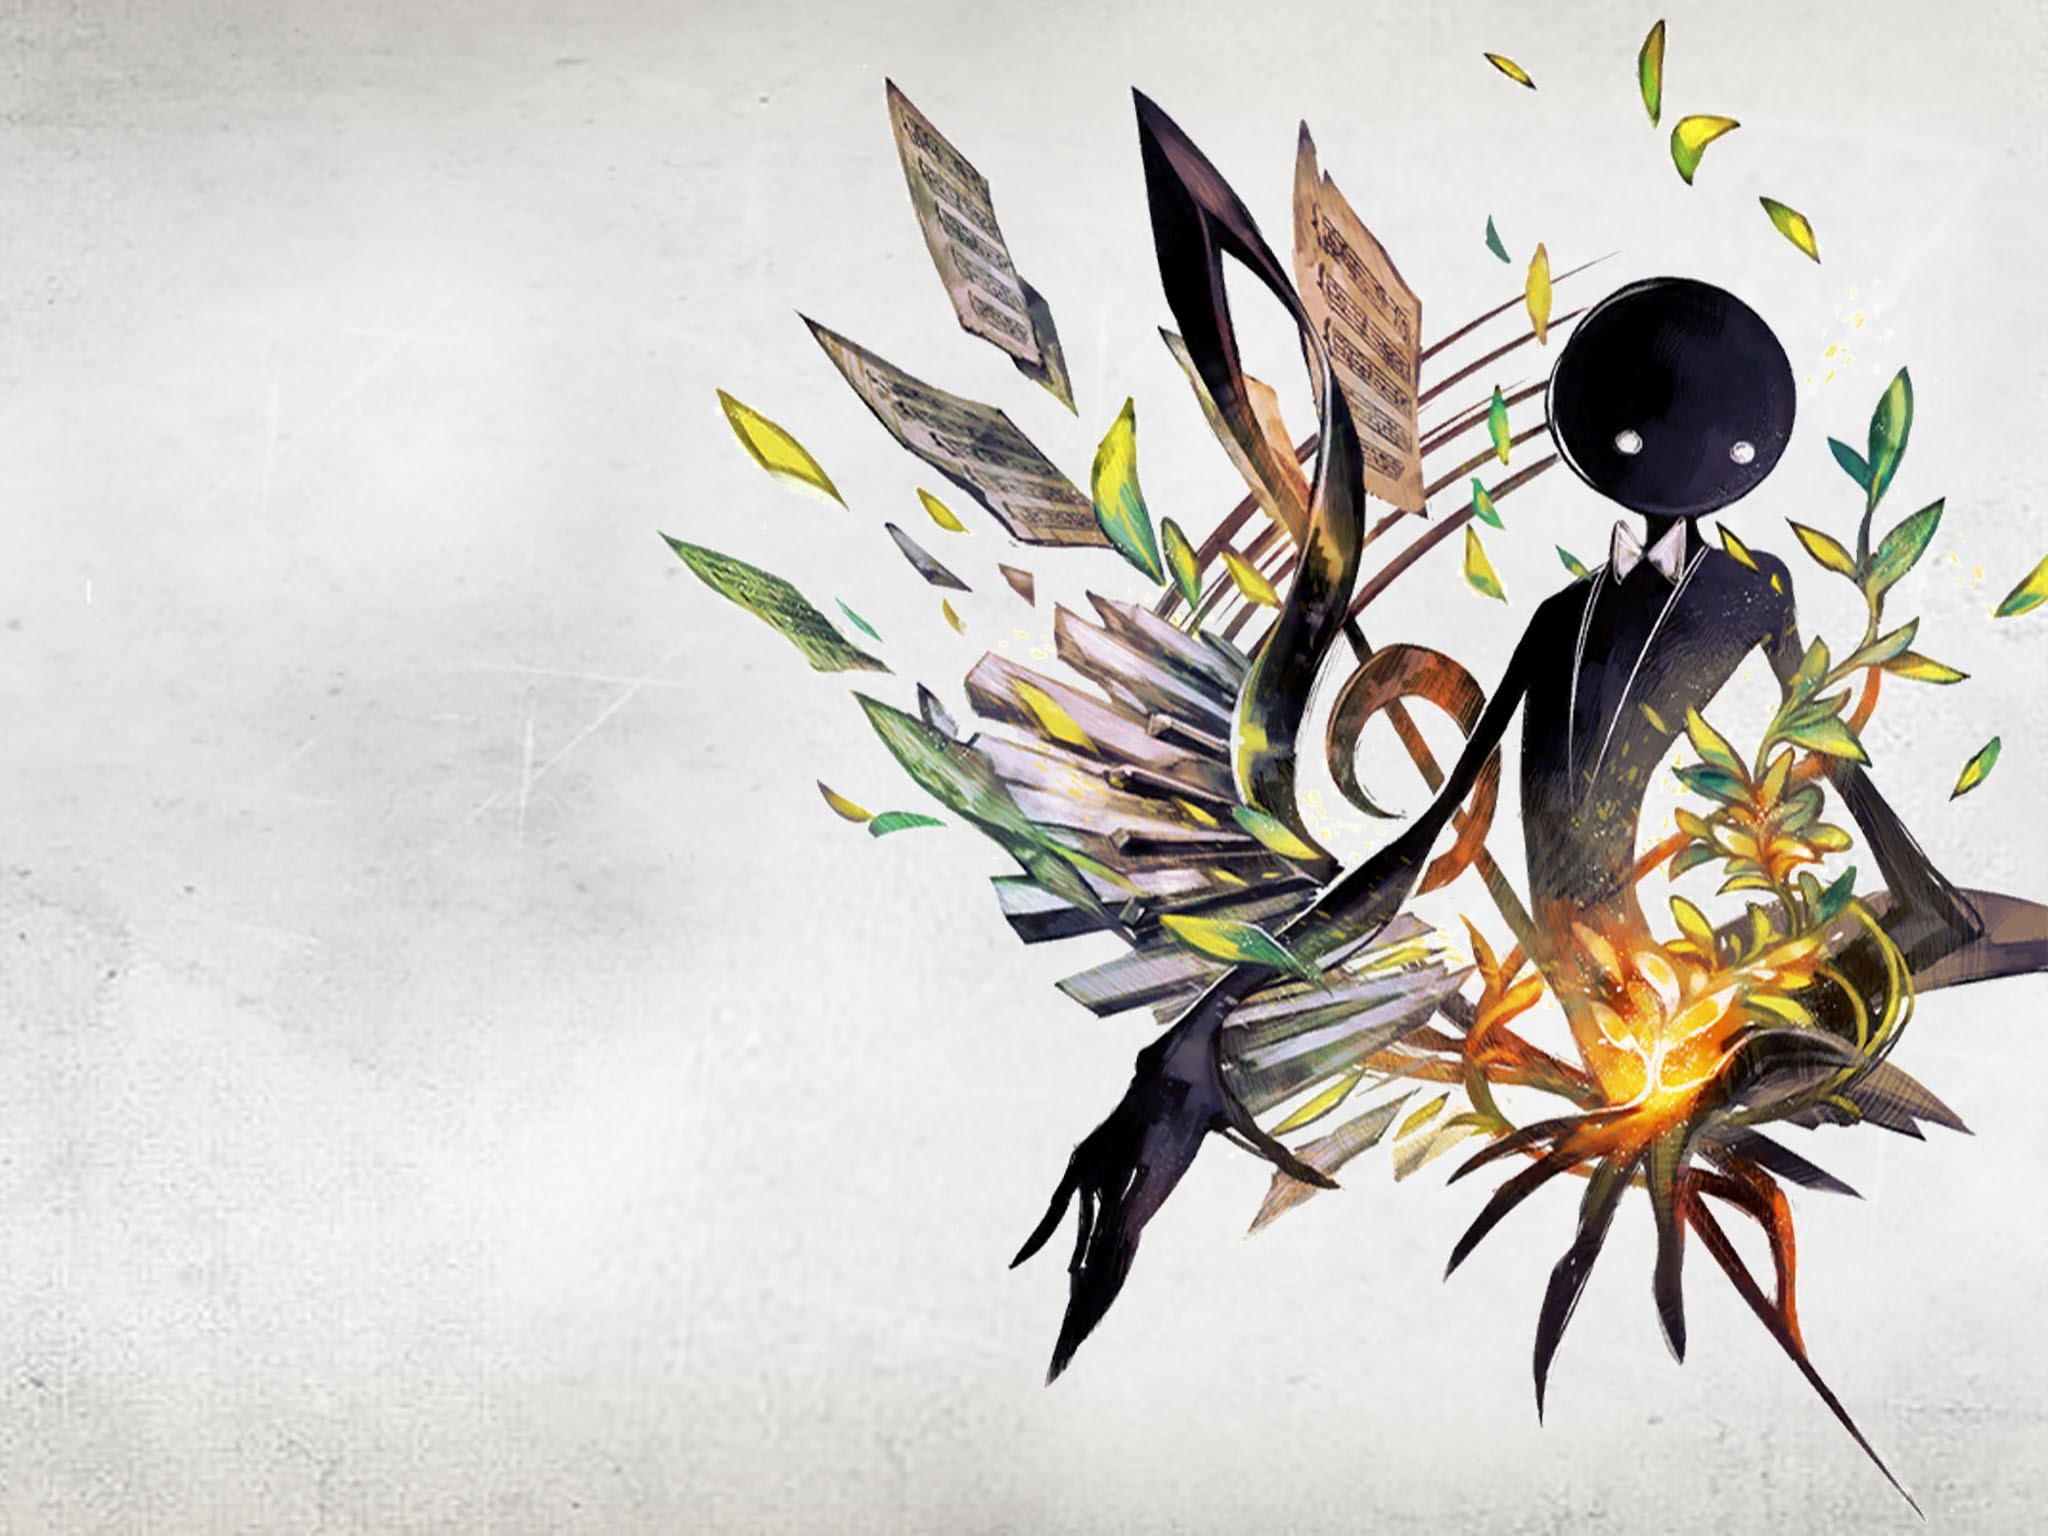 Deemo Wallpapers Video Game Hq Deemo Pictures 4k Wallpapers 19